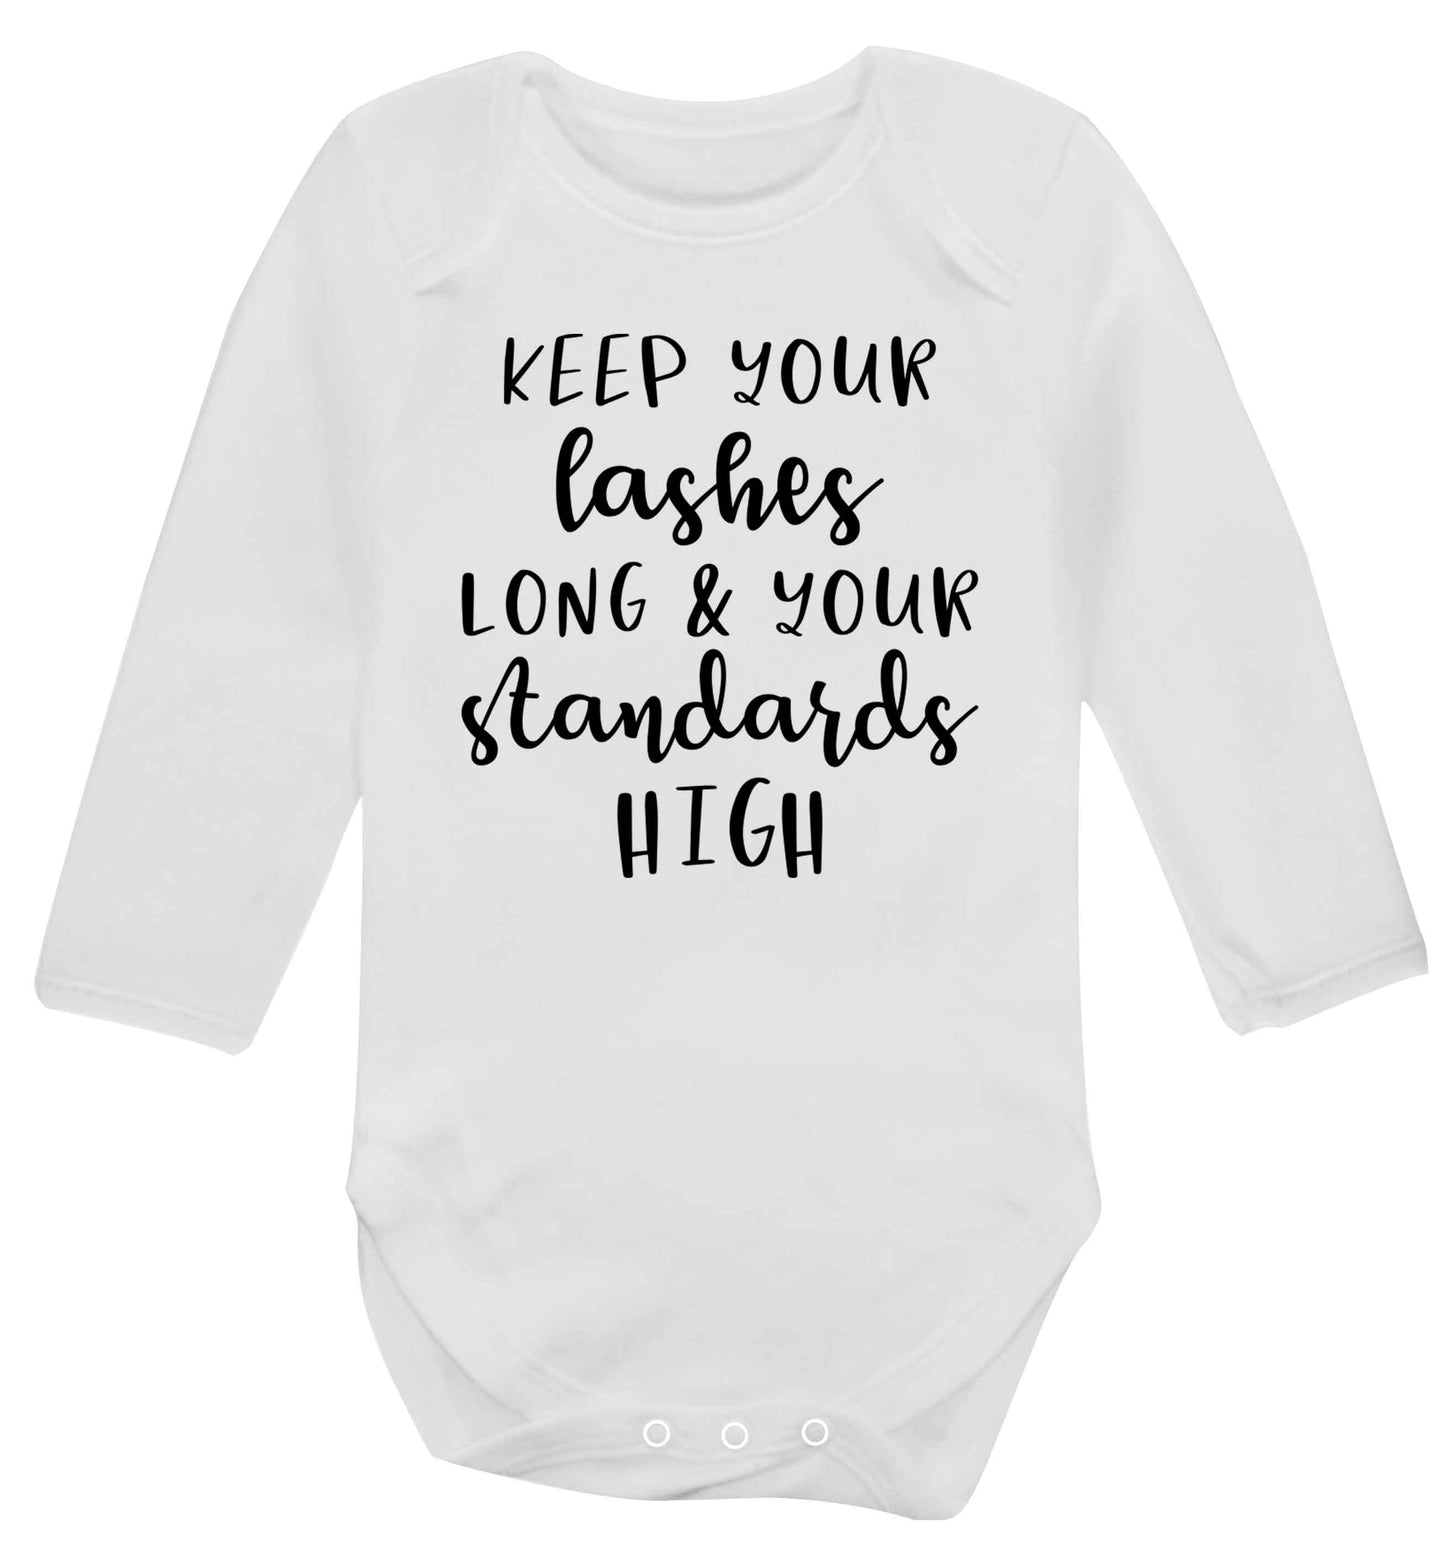 Keep your lashes long and your standards high Baby Vest long sleeved white 6-12 months